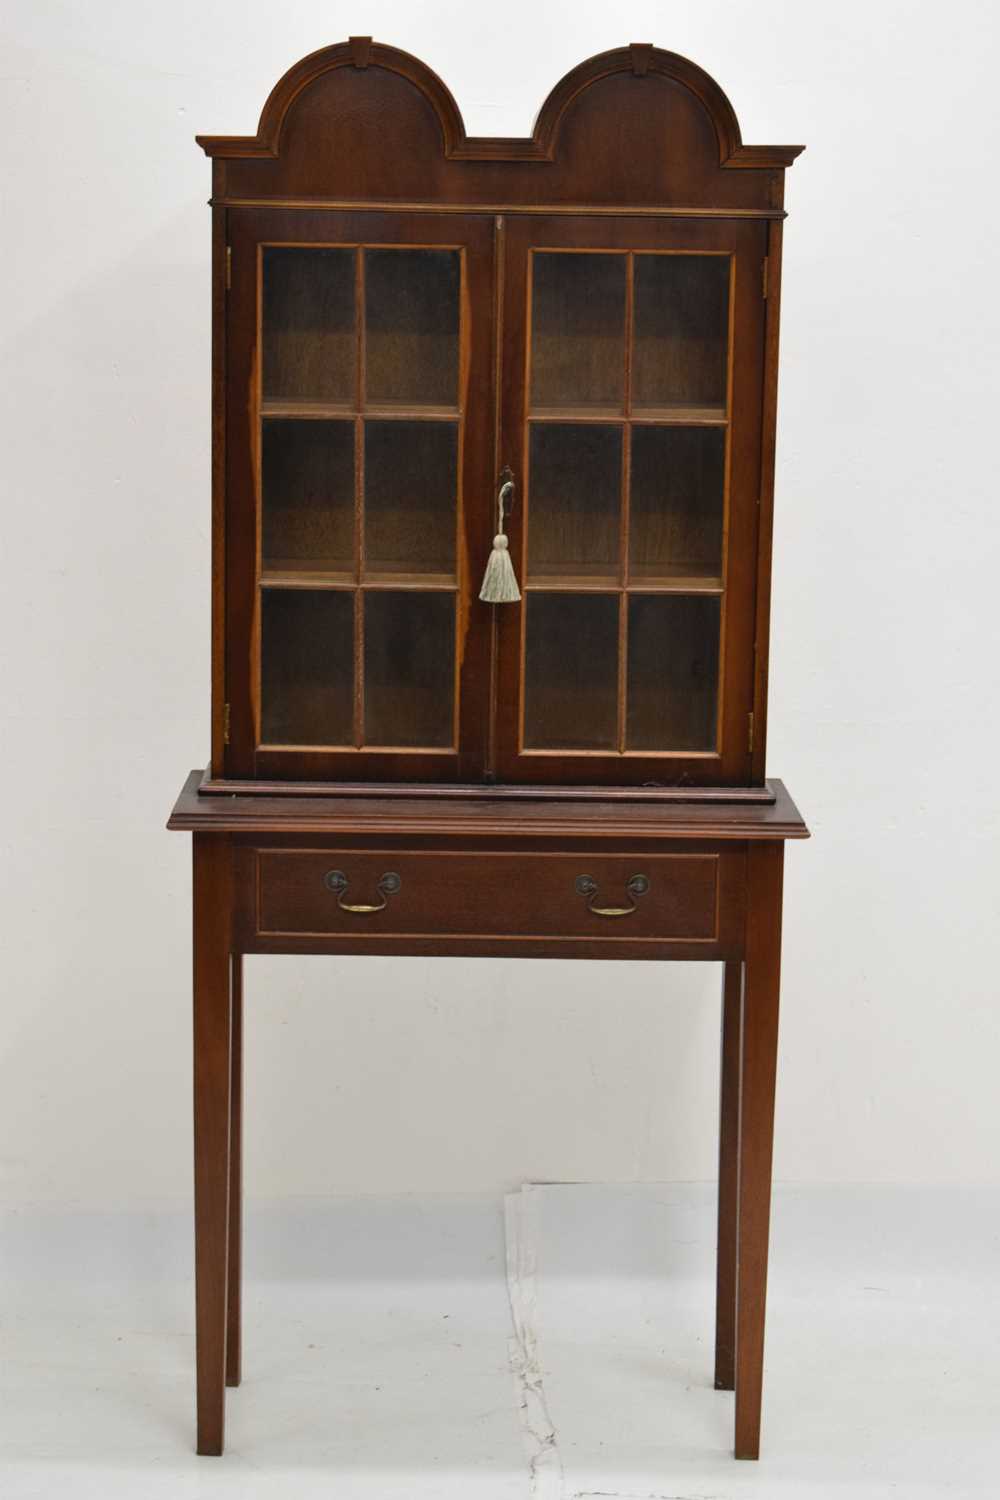 Reproduction mahogany double-domed cabinet on stand - Image 2 of 6